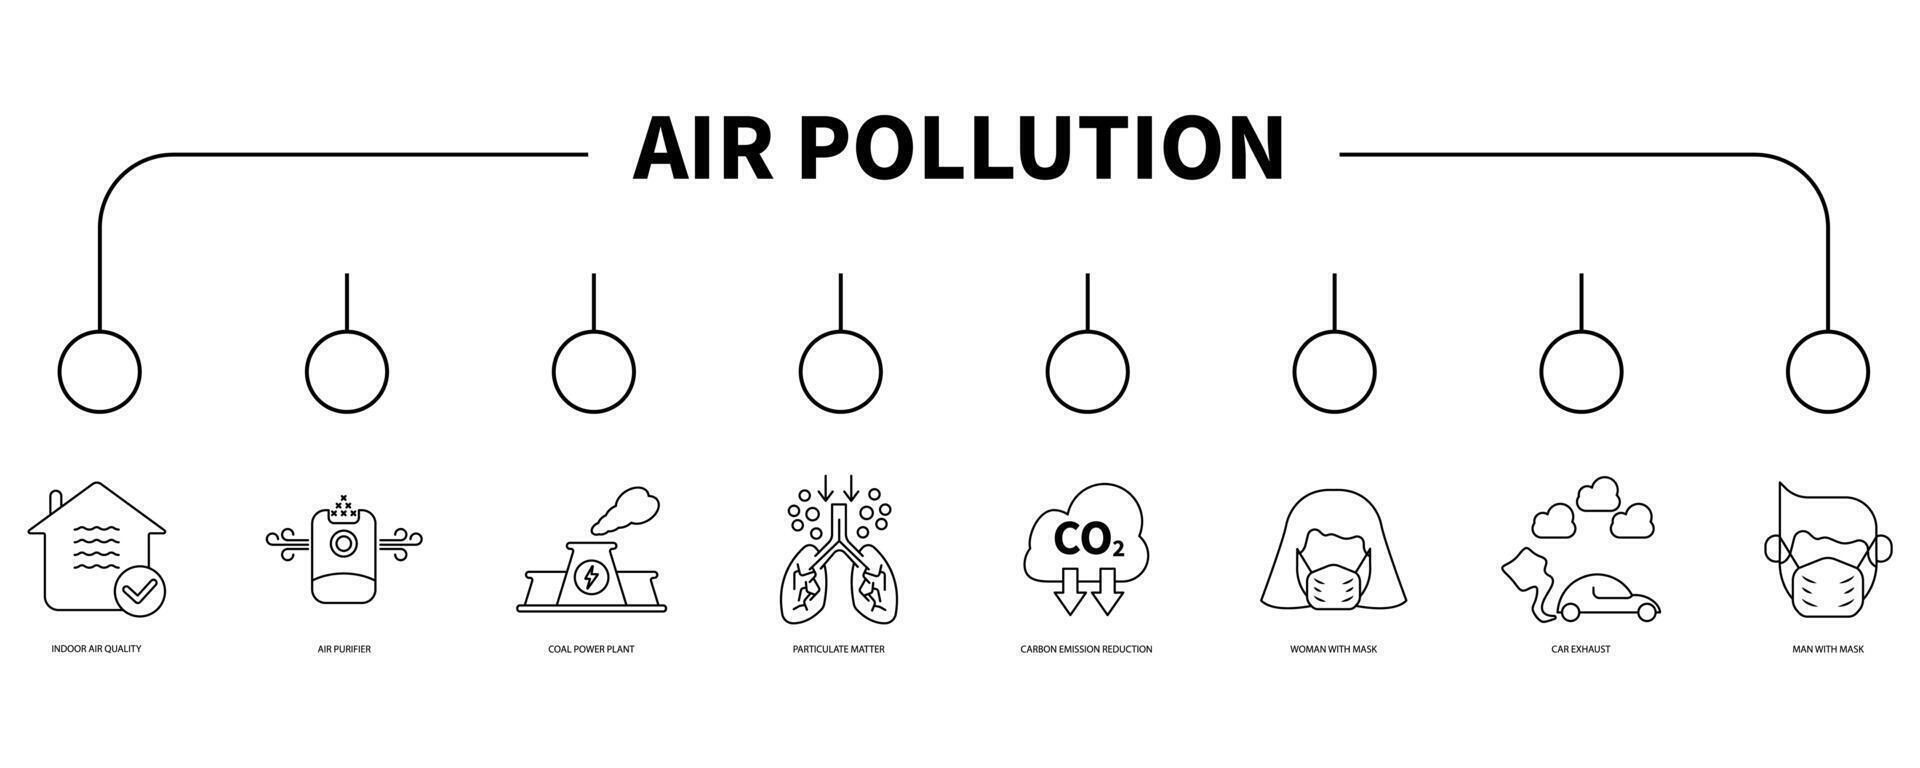 Air pollution banner web icon vector illustration concept